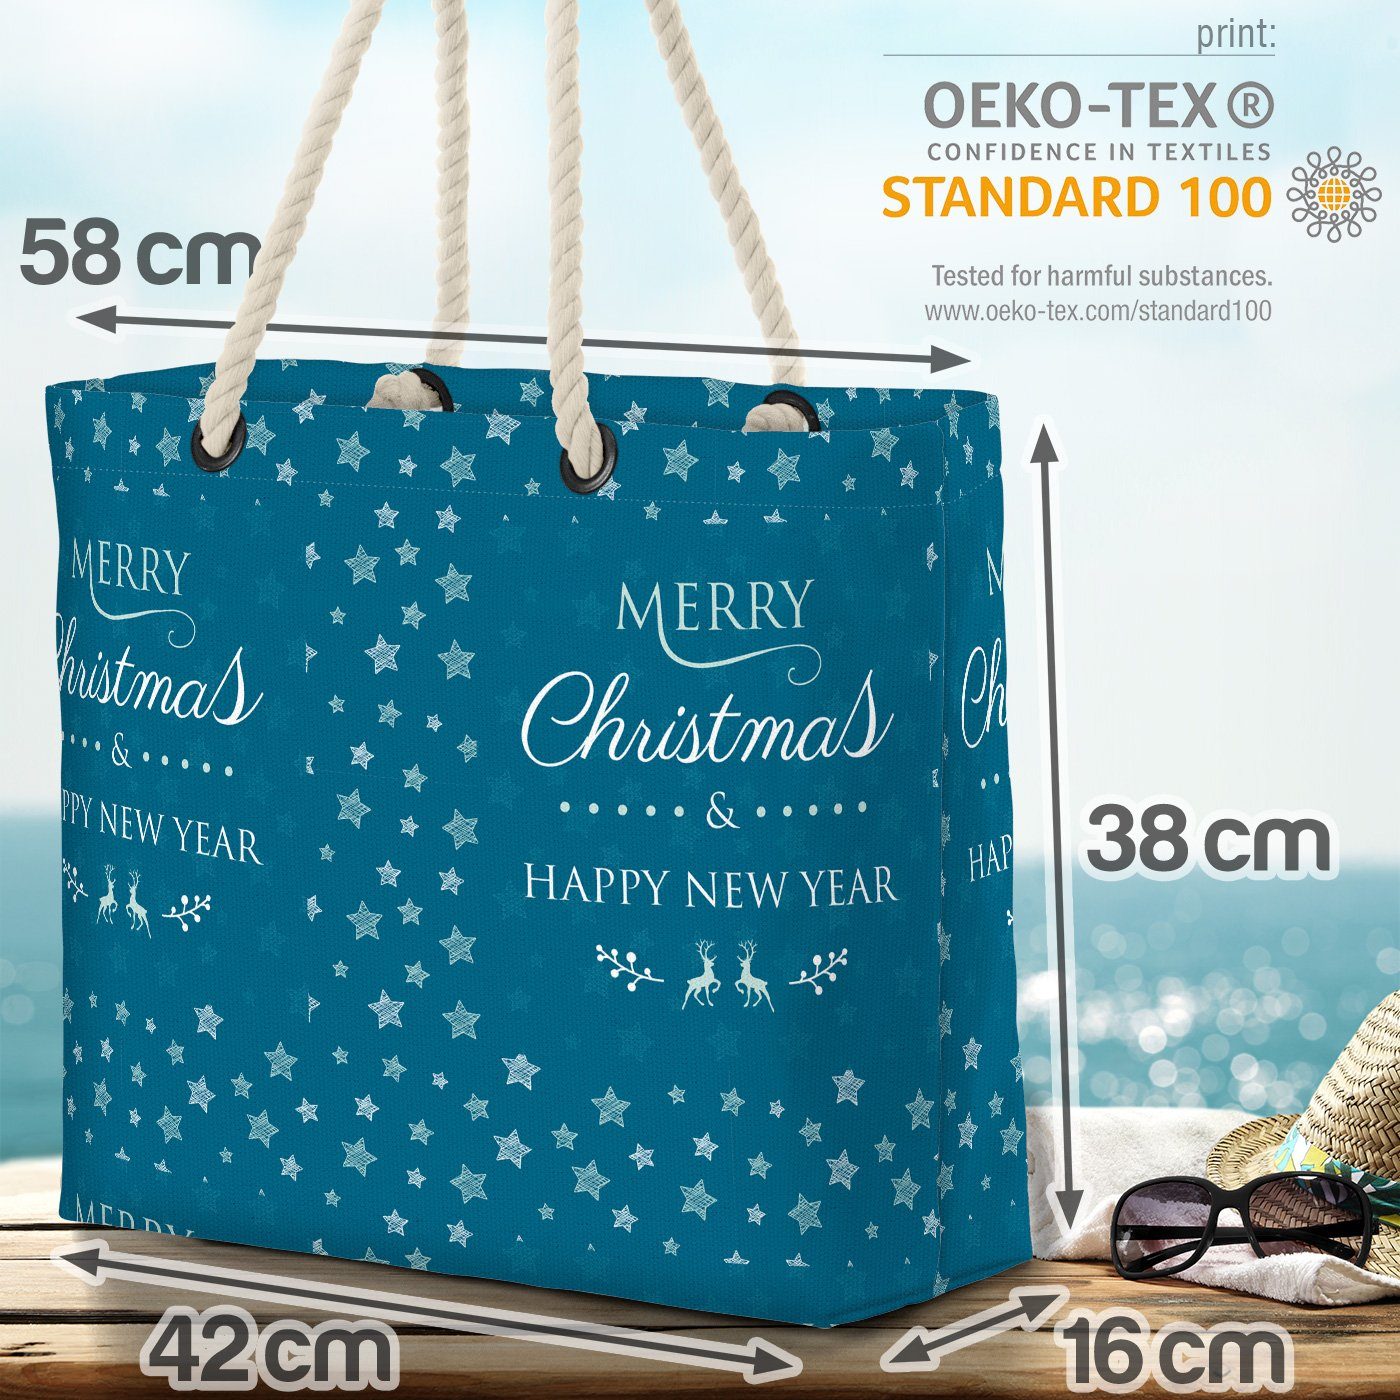 VOID Strandtasche (1-tlg), New New Christmas Happy Beach Year Bag Merry Christmas Silvester Weihnacht Year